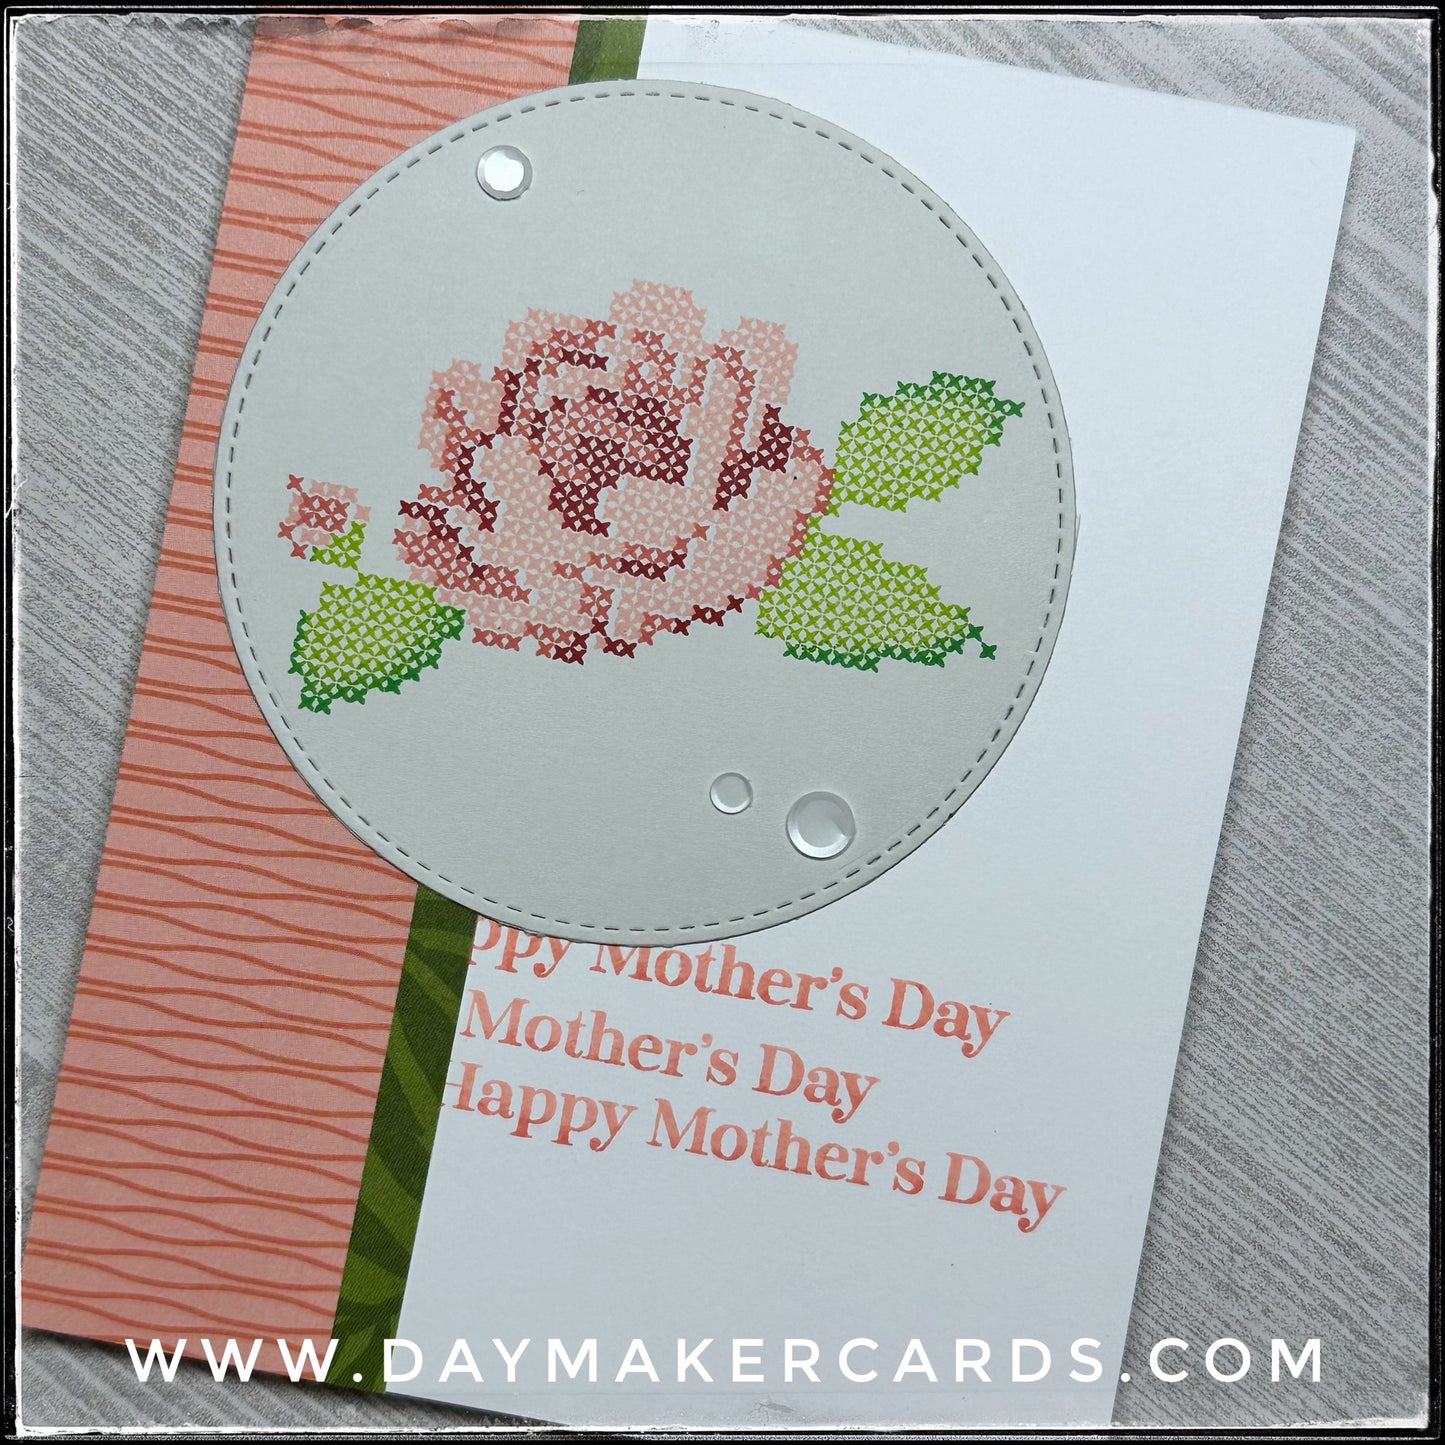 Happy Mother's Day - Stitched Roses Handmade Card